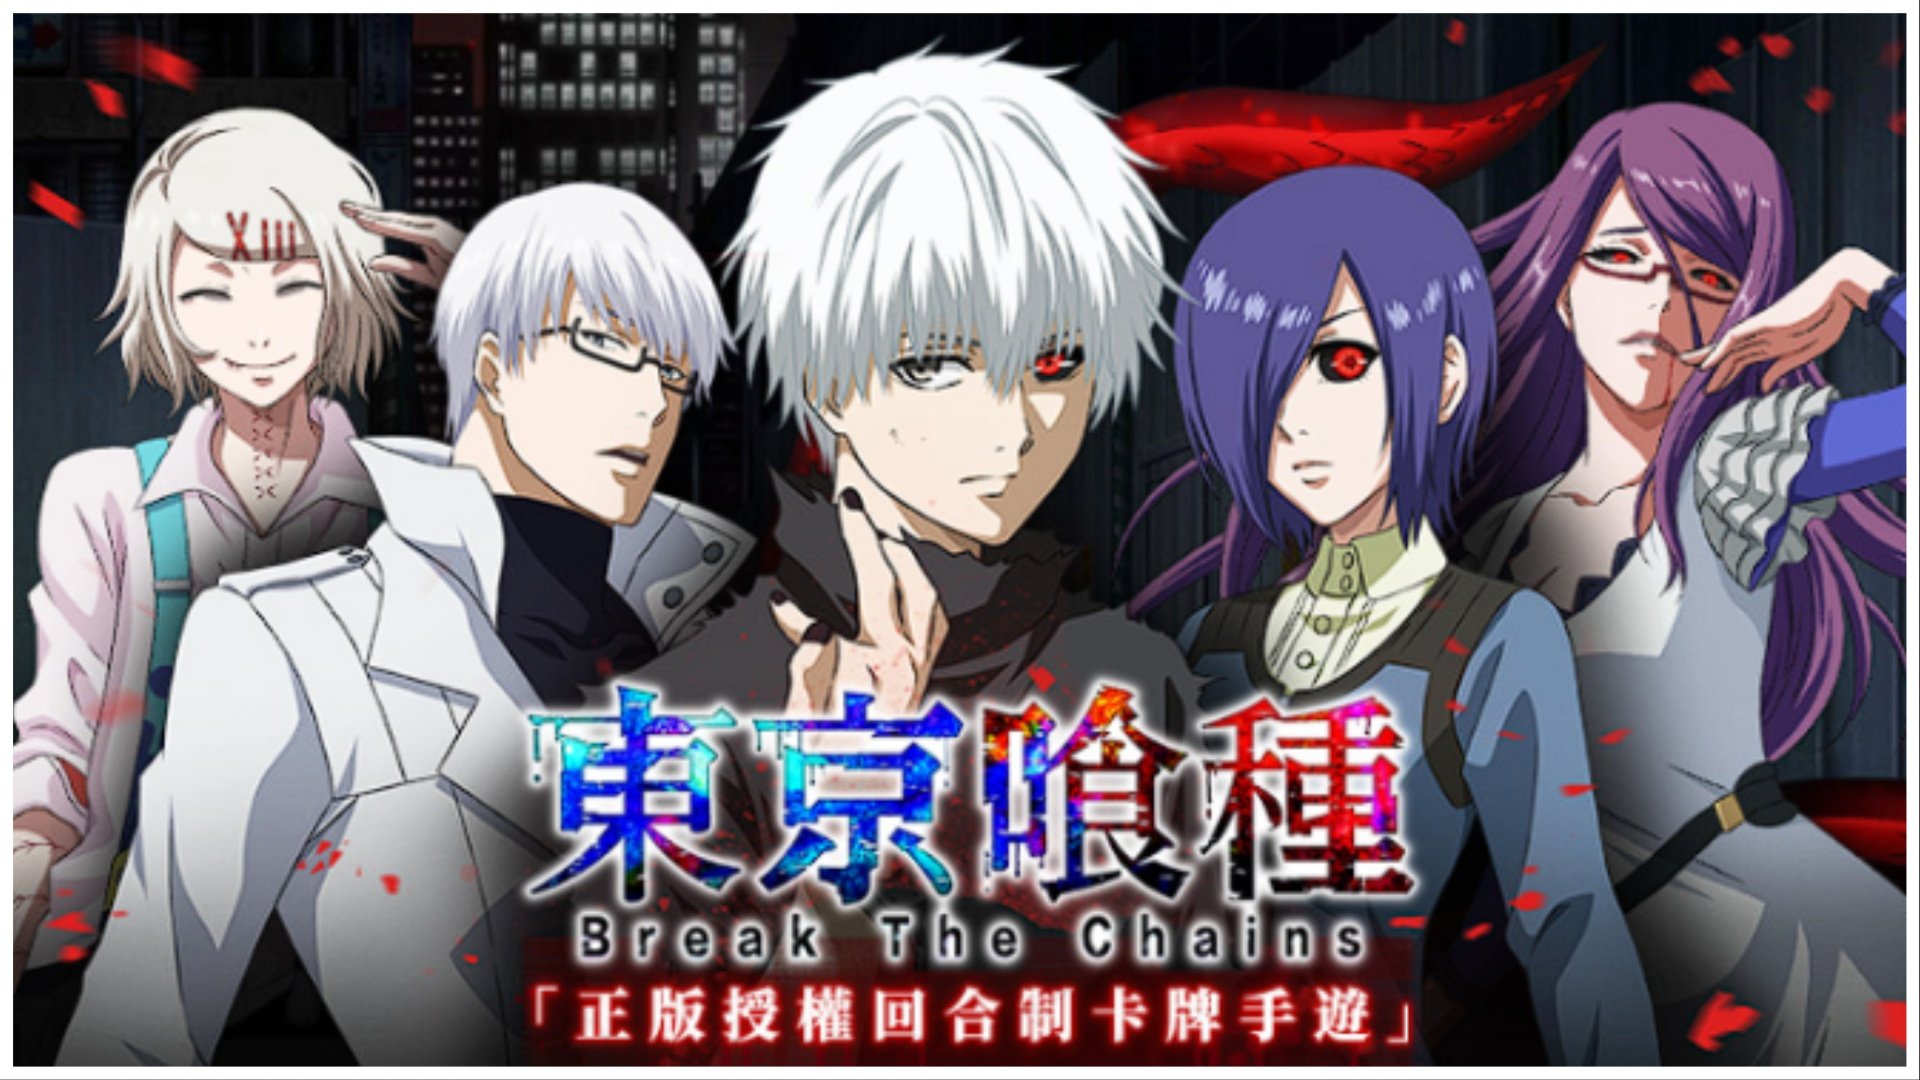 Tokyo Ghoul: Break the Chains Codes